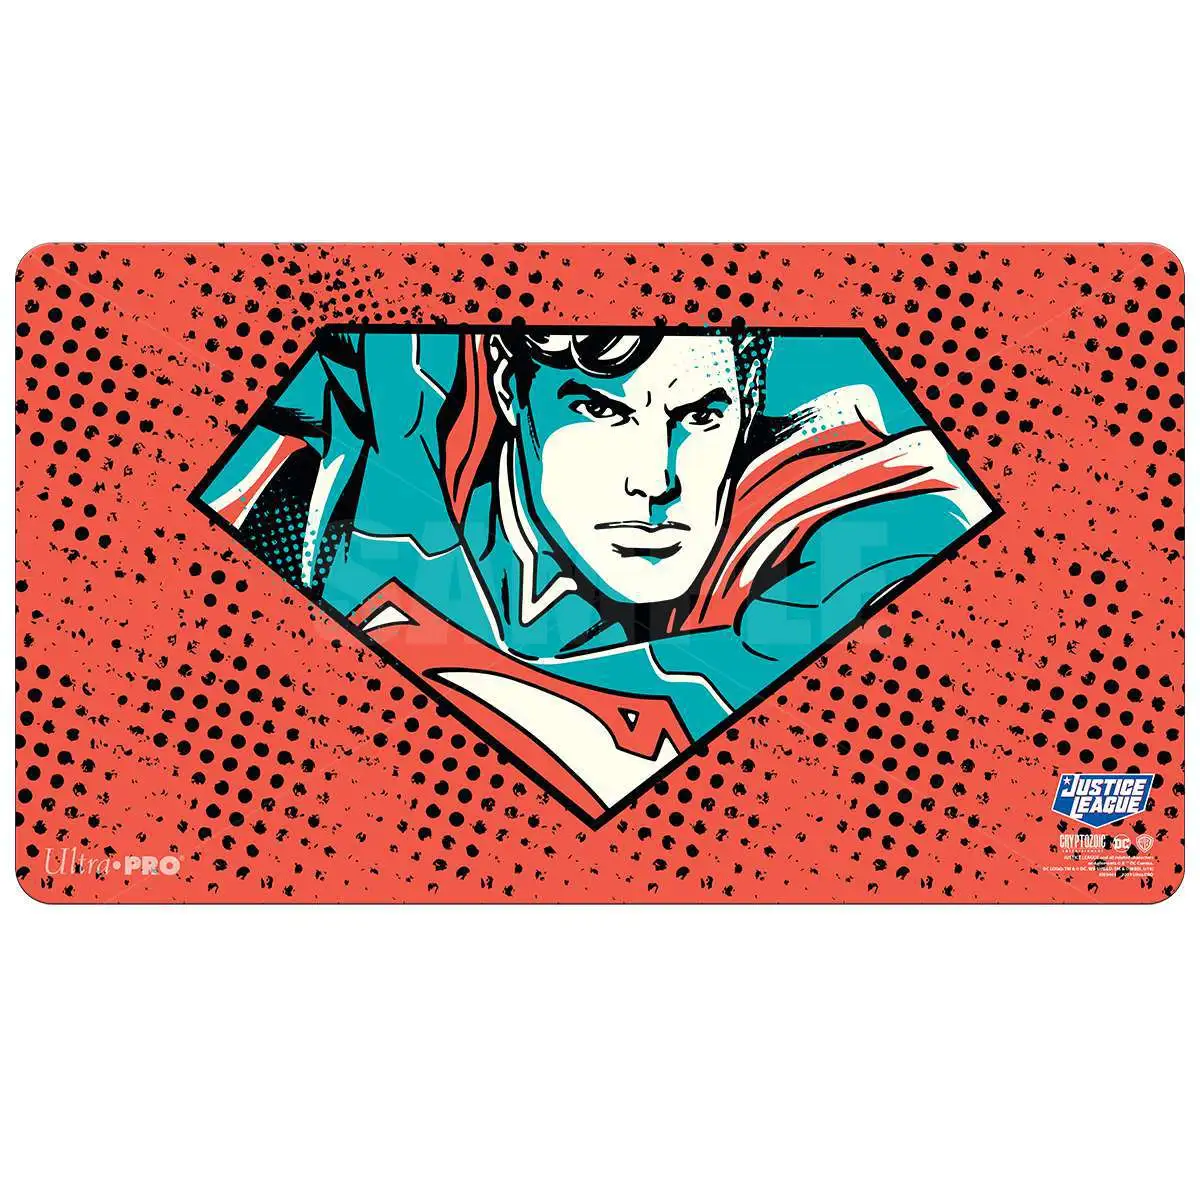 65 Count Justice League Deck Protector Wonder Woman Standard Card Sleeves 